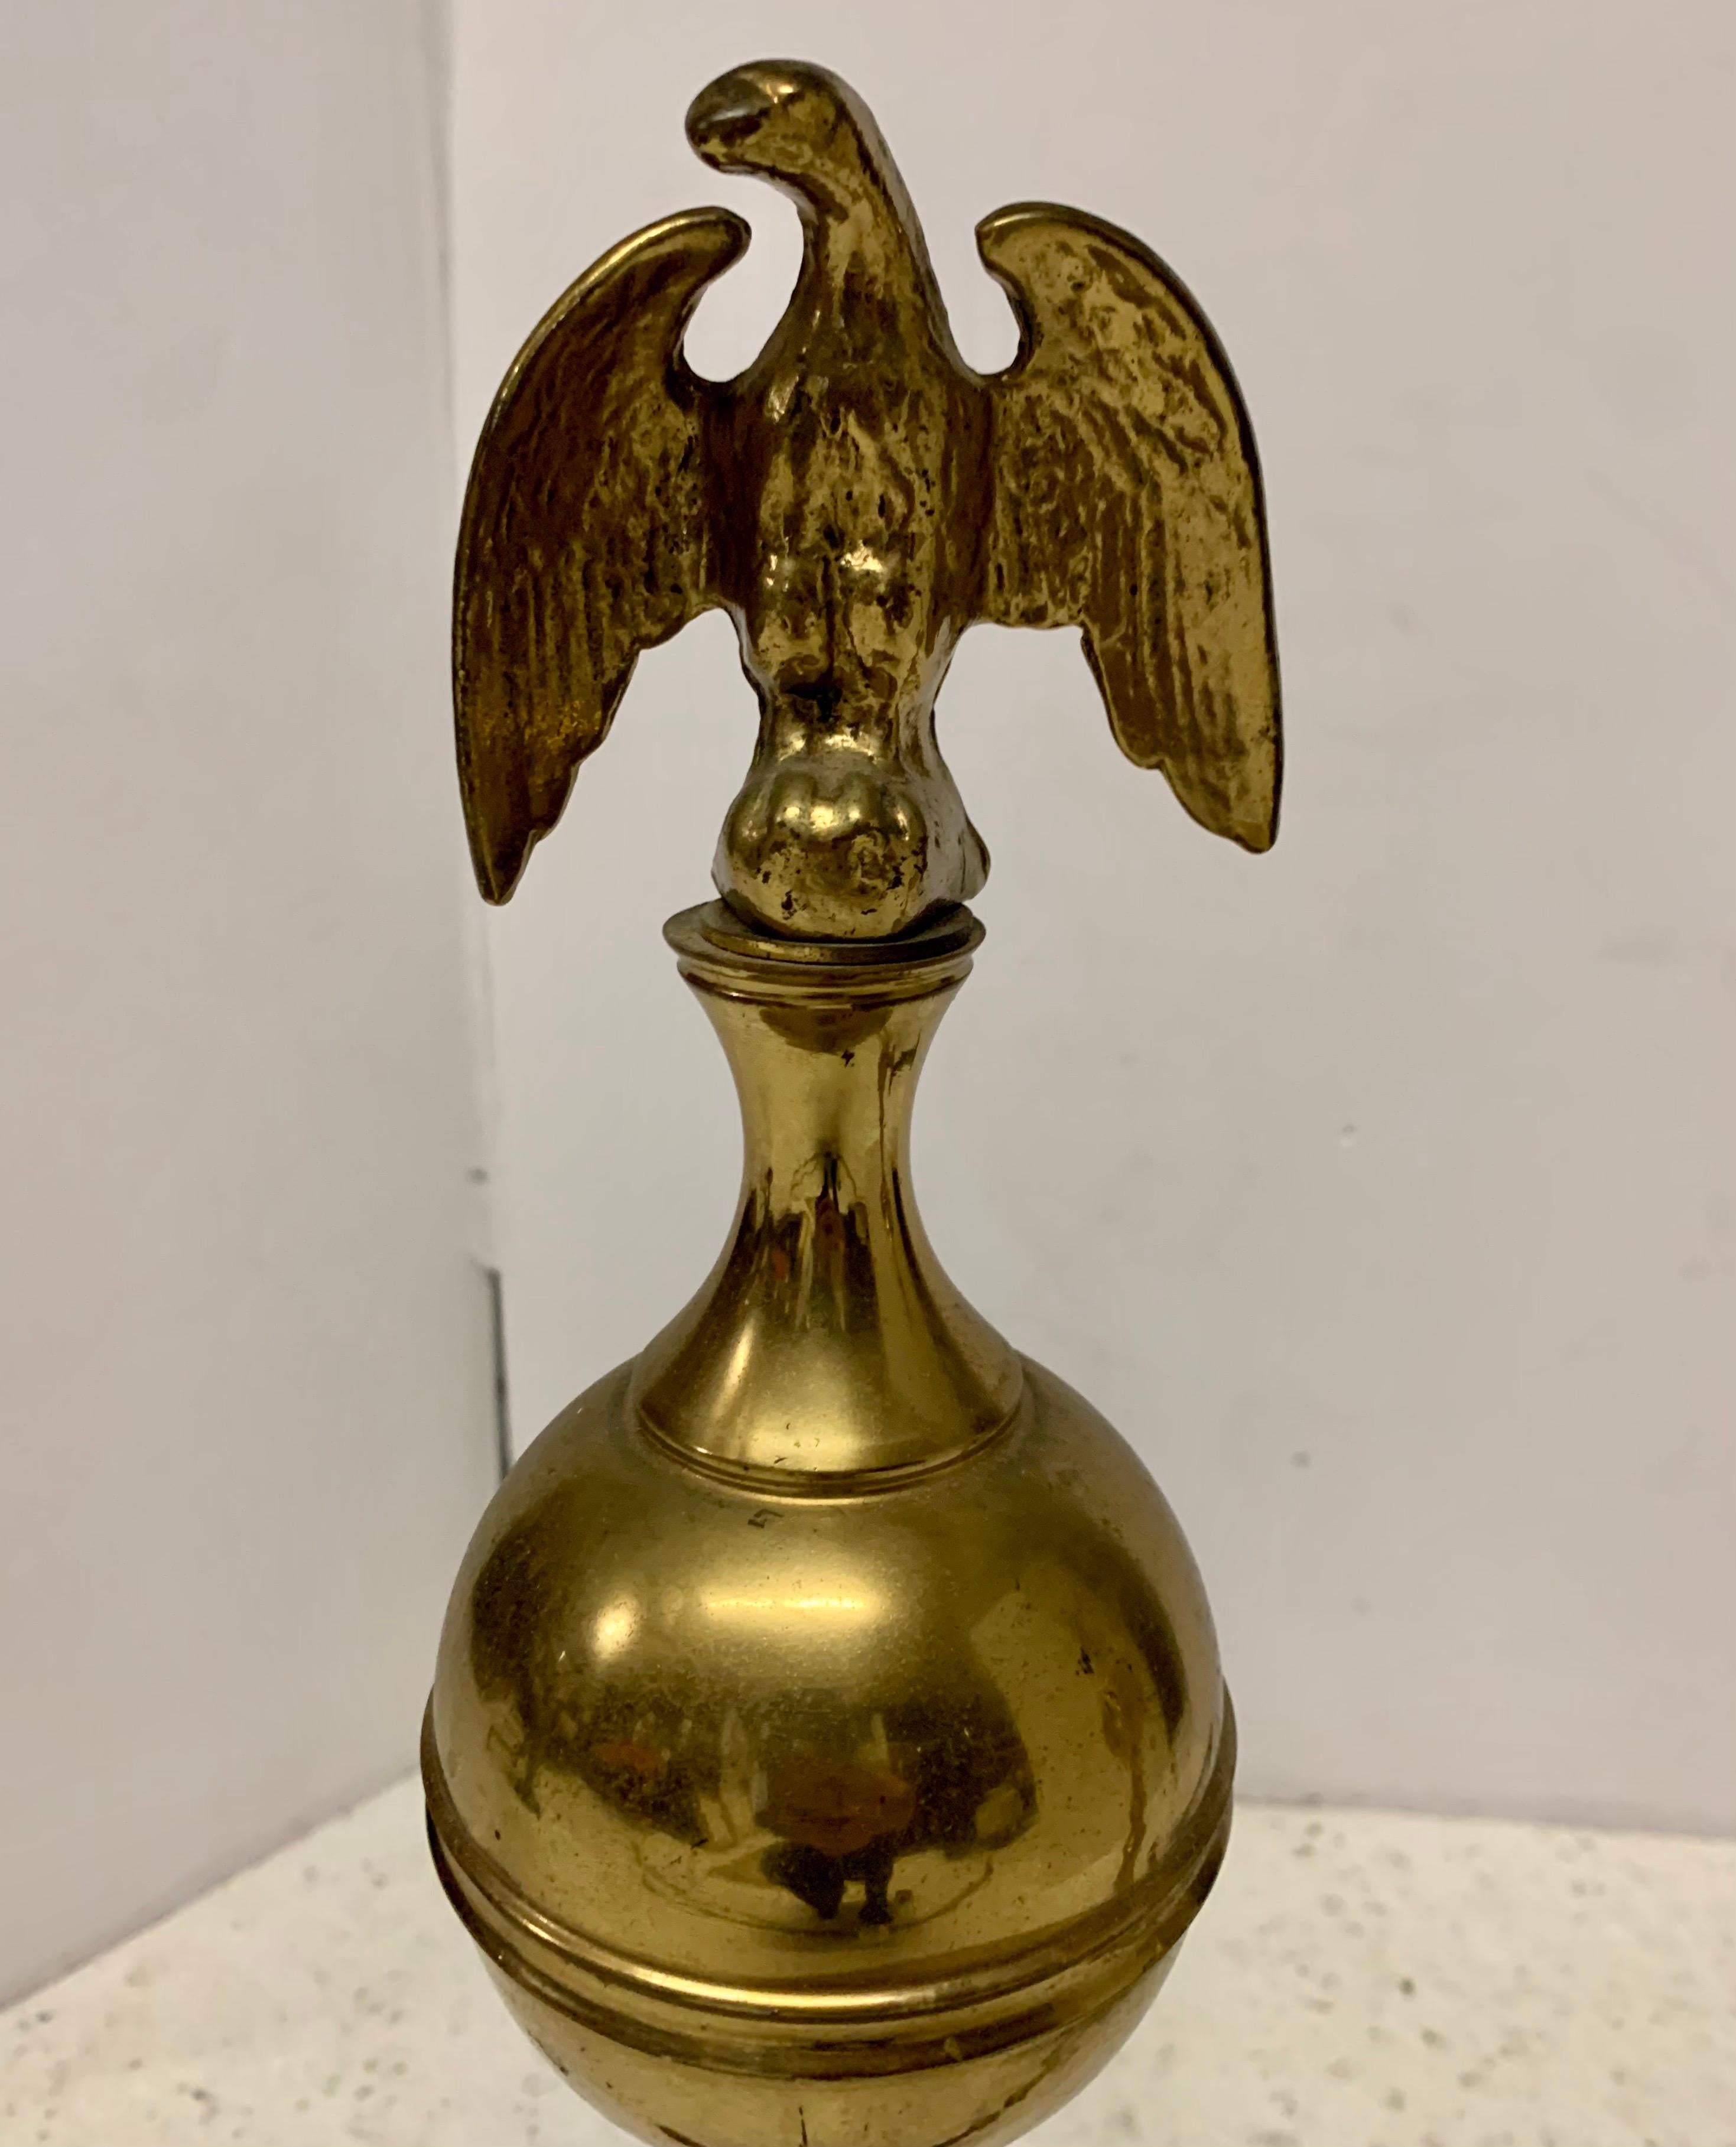 Federal style heavy brass andirons with eagle tops surmounted on brass cannonballs and supported on ball and claw feet.